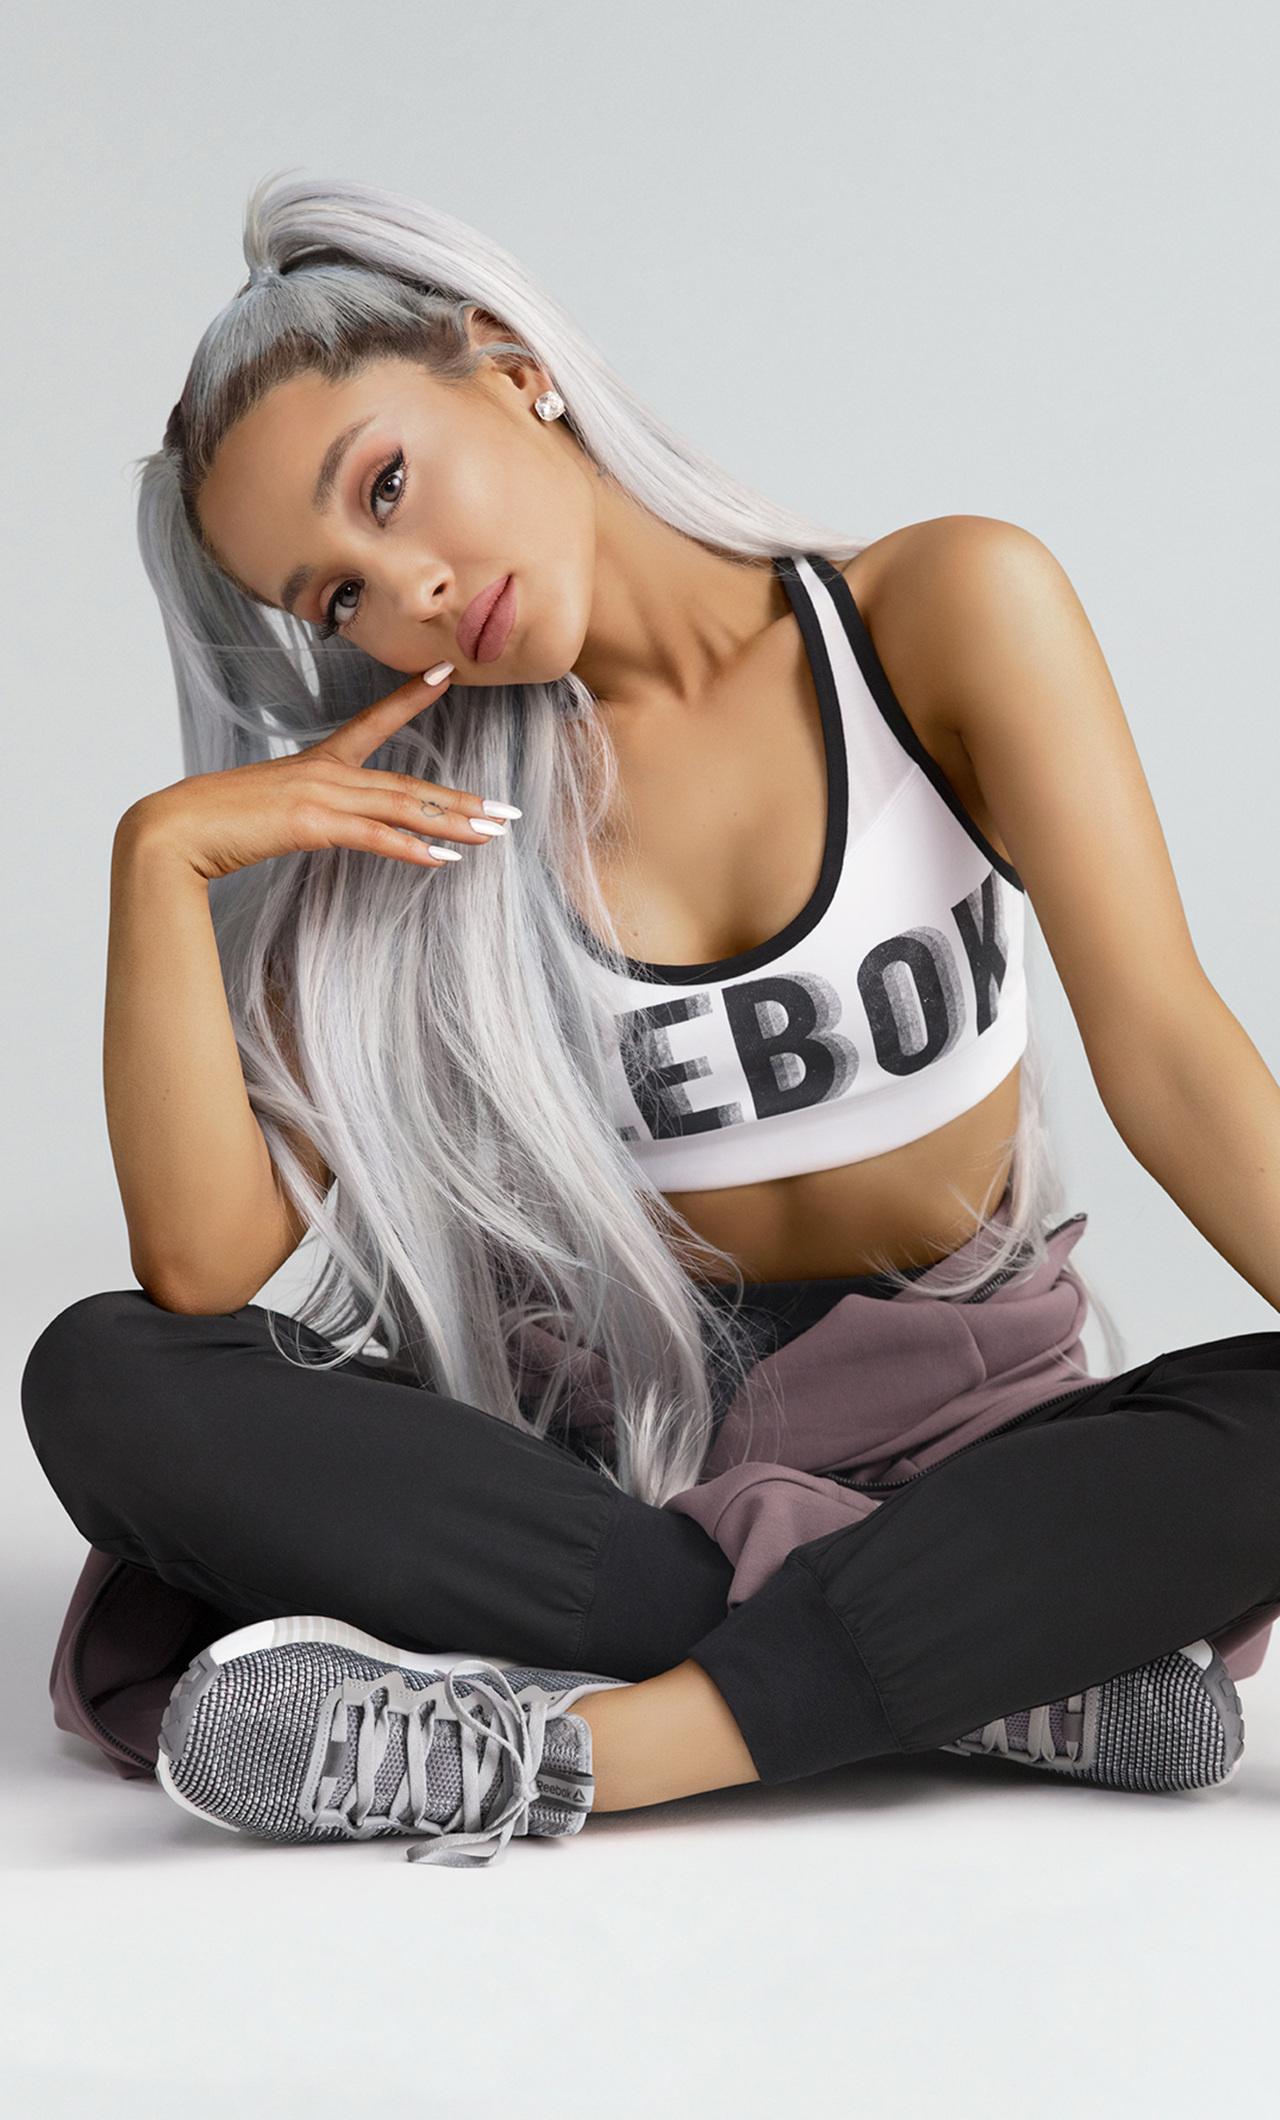 Reebok: Collaboration with Ariana Grande, The world's biggest pop star, The brand ambassador with credibility and impact. 1280x2120 HD Background.